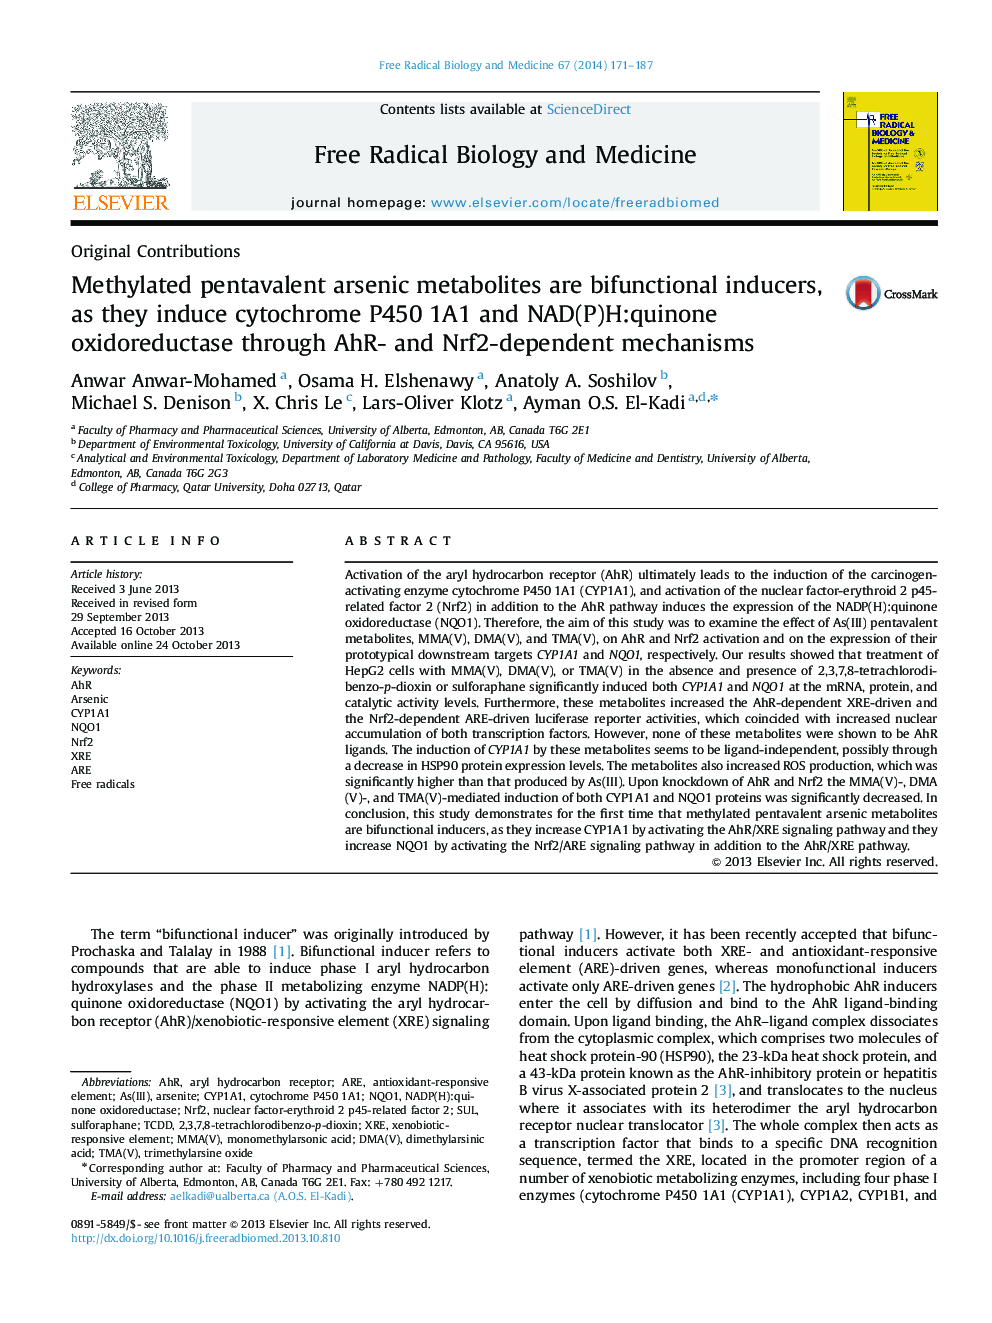 Methylated pentavalent arsenic metabolites are bifunctional inducers, as they induce cytochrome P450 1A1 and NAD(P)H:quinone oxidoreductase through AhR- and Nrf2-dependent mechanisms